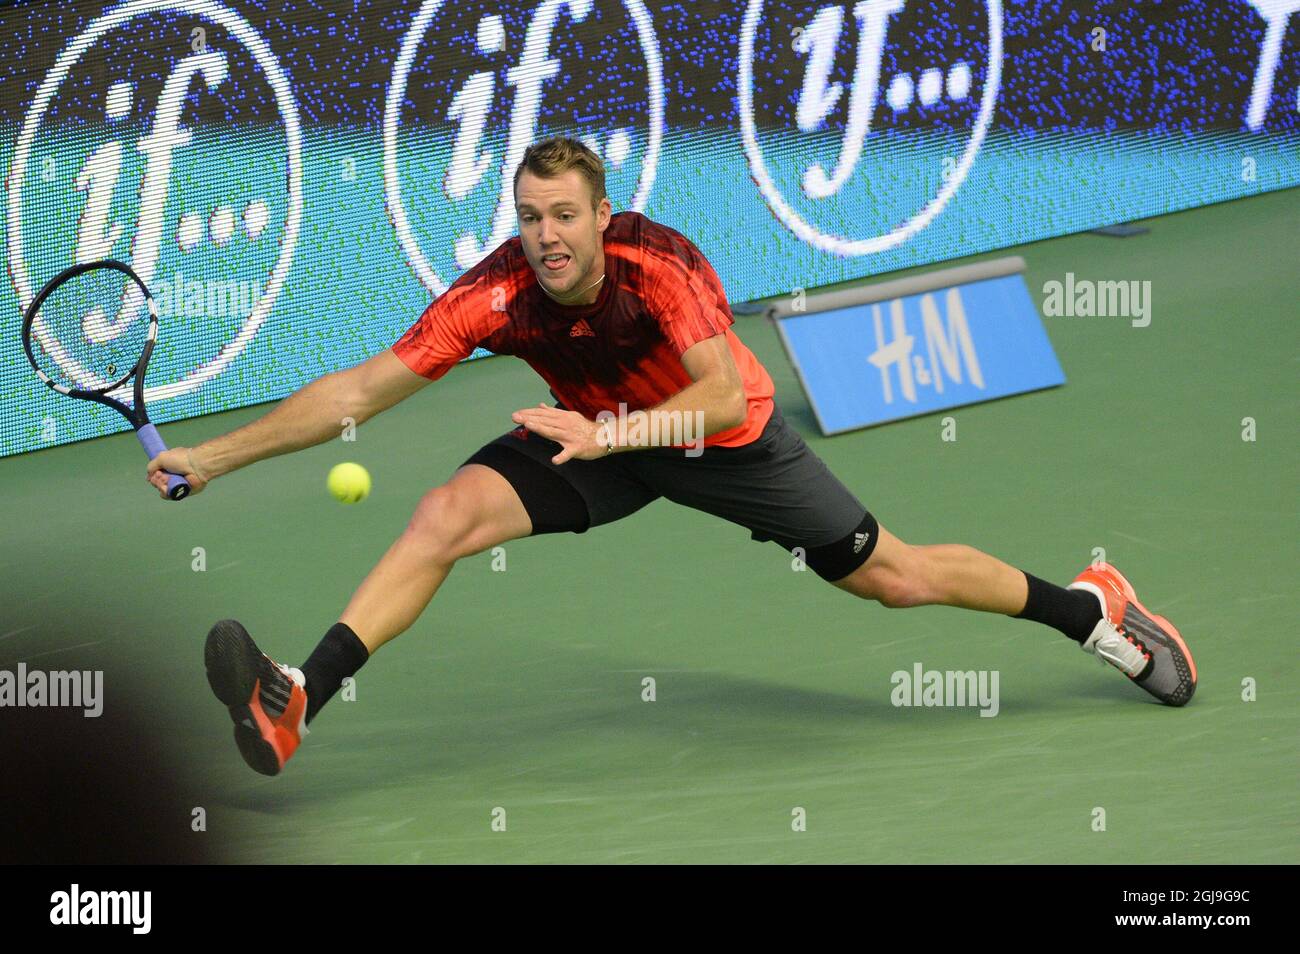 Jack Sock, of US returns to Tomas Berdych, of Czech Republic during the Stockholm Open final Sunday Oct. 25, 2015. Foto: Anders Wiklund / TT / Kod 10040 Stock Photo